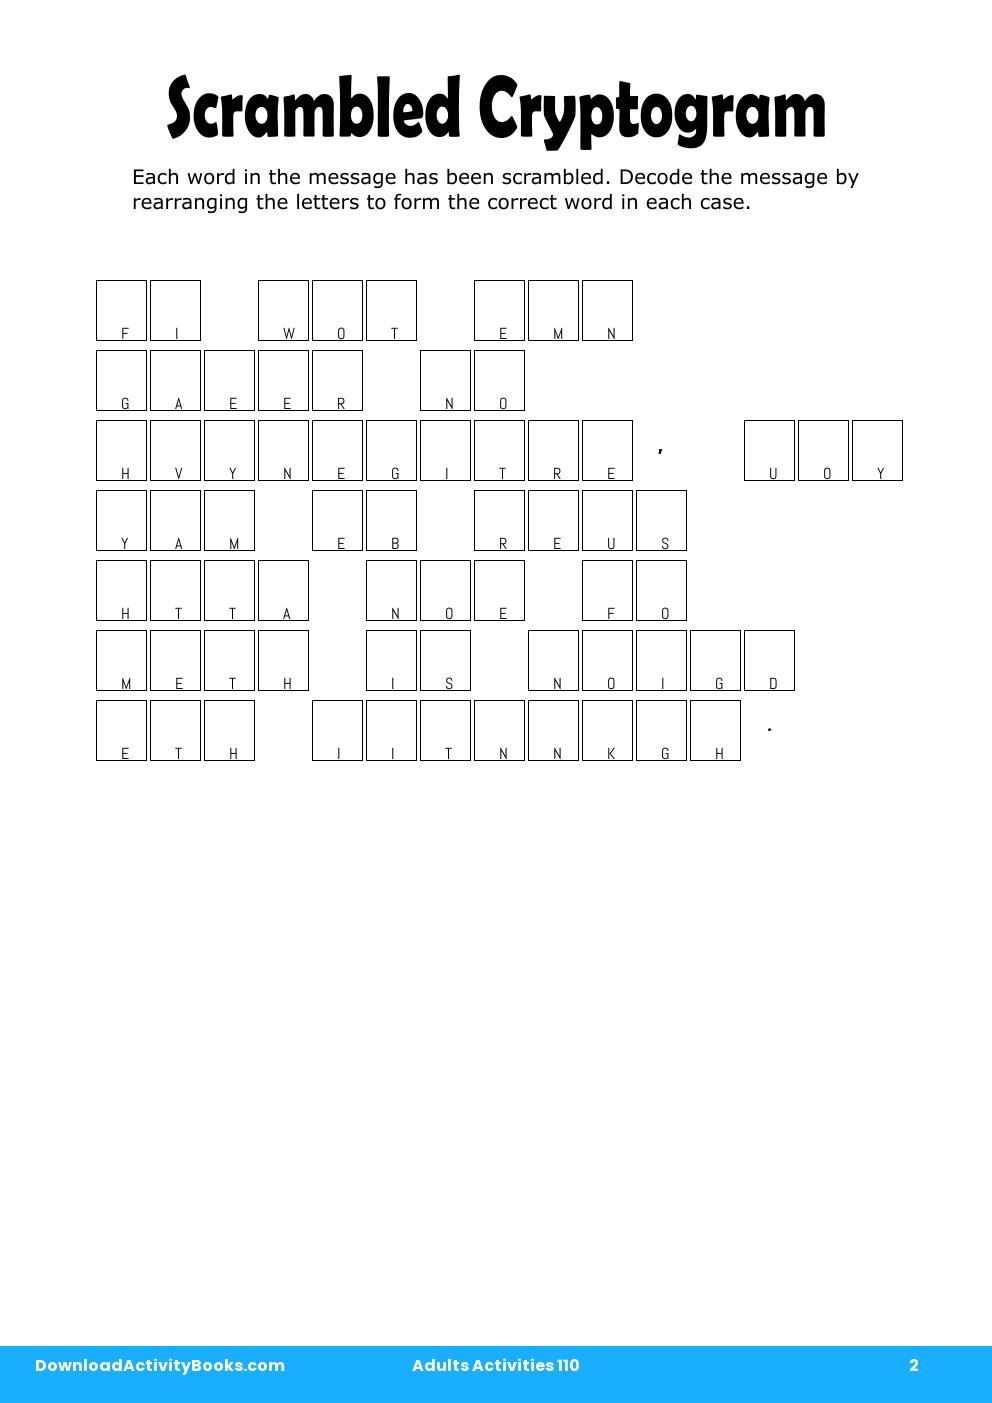 Scrambled Cryptogram in Adults Activities 110